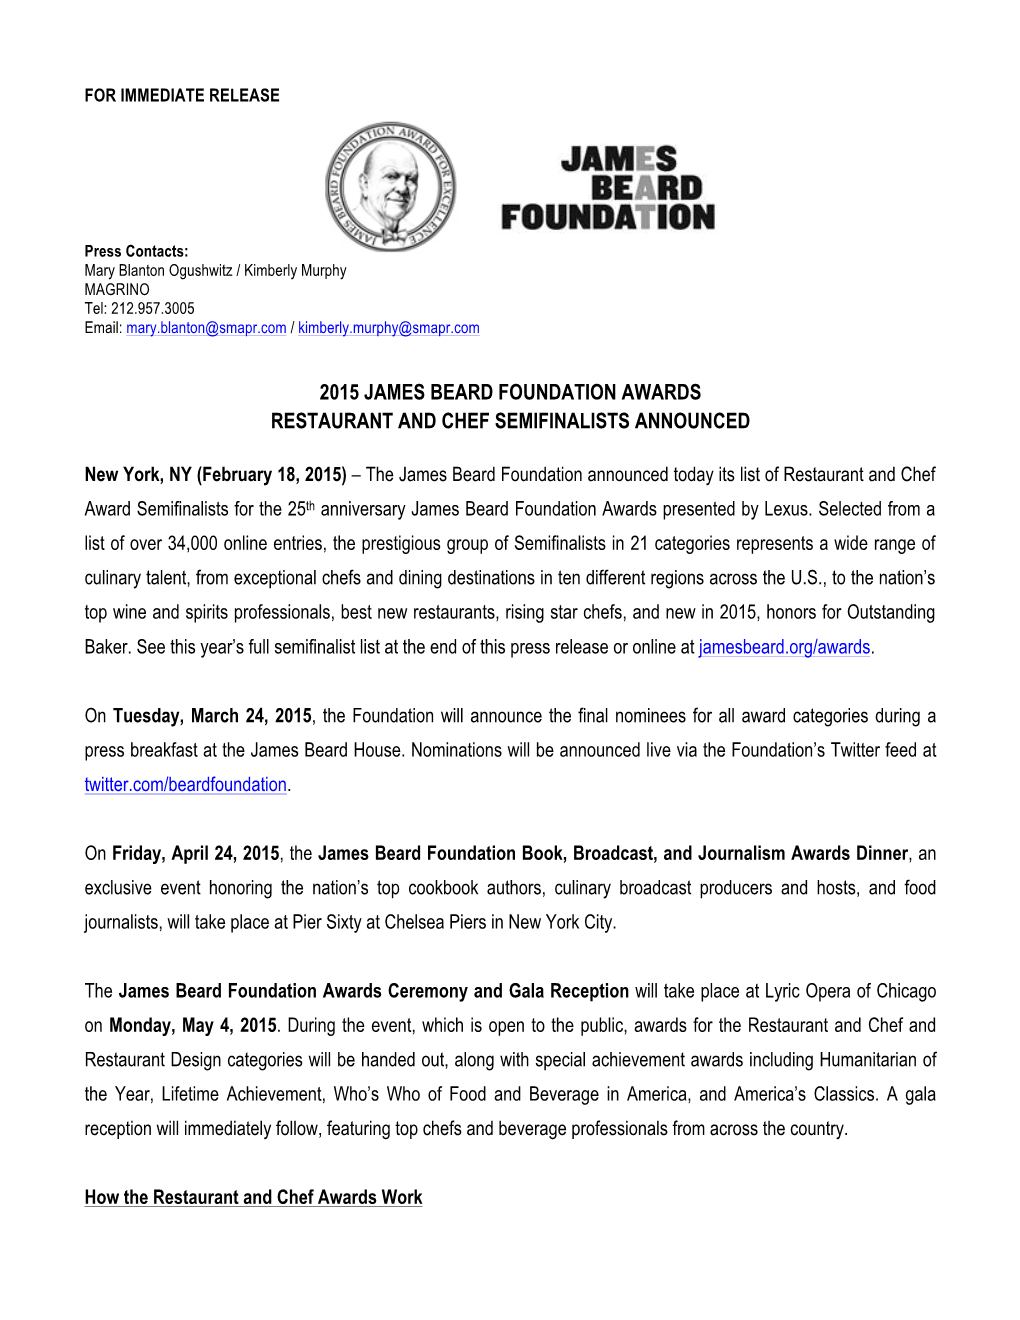 2015 James Beard Foundation Awards Restaurant and Chef Semifinalists Announced